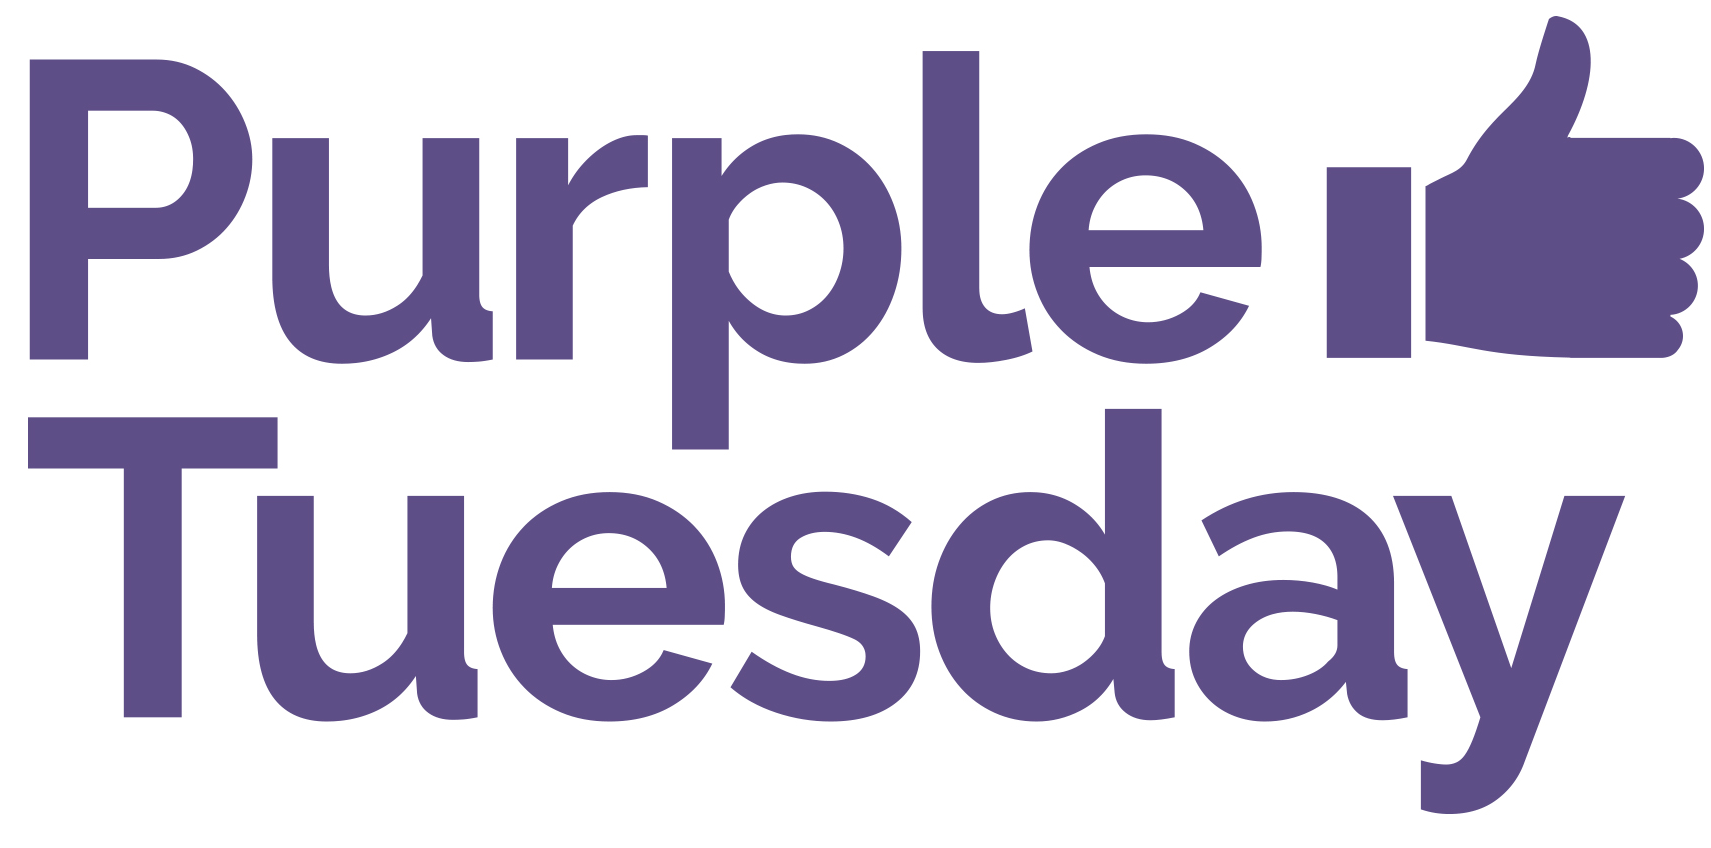 We support Purple Tuesday